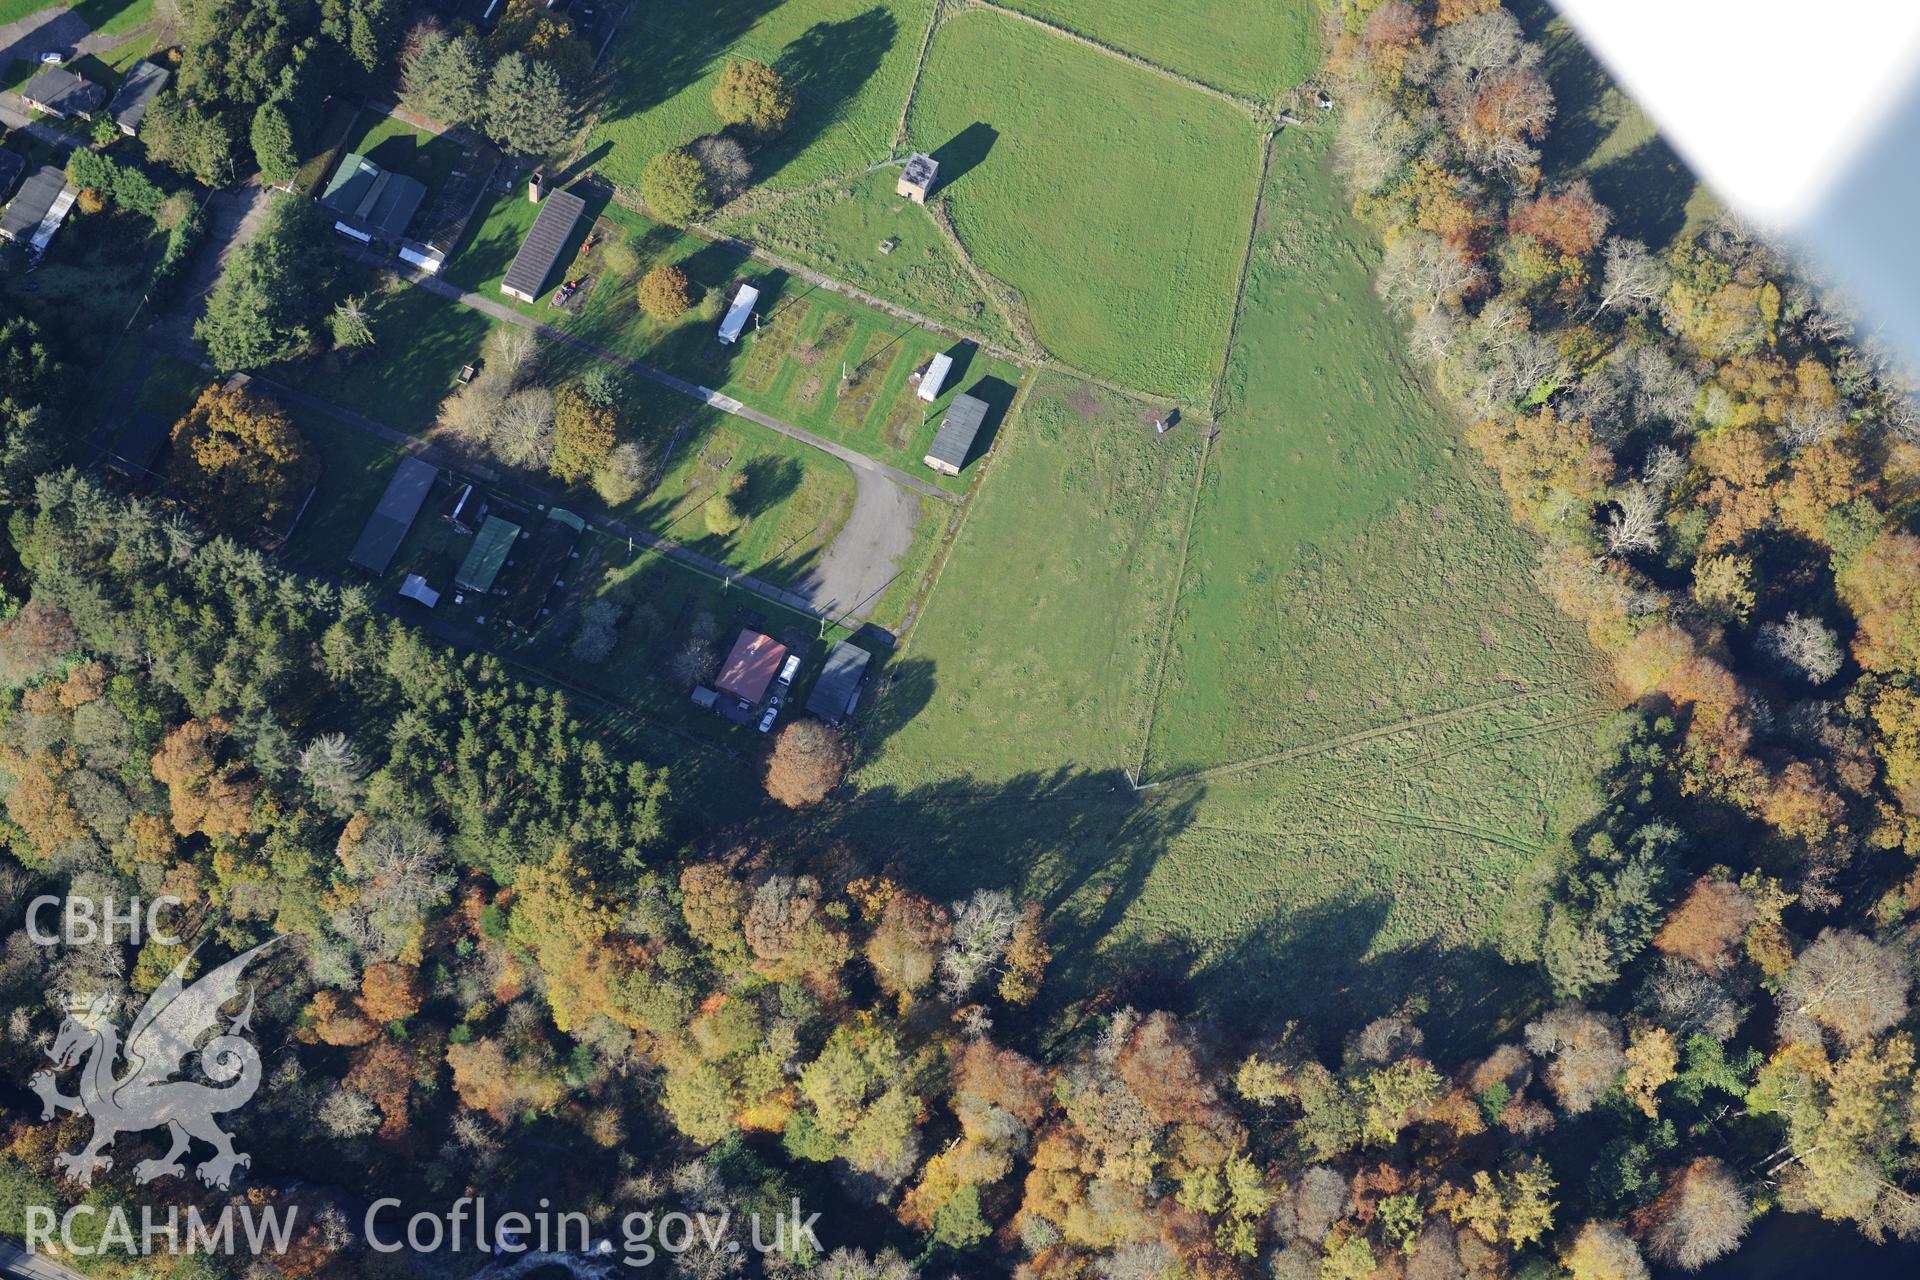 Henllan Bridge prisoner of war camp and site of Caerau hill fort, Henllan, near Newcastle Emlyn.  Oblique aerial photograph taken during the Royal Commission's programme of archaeological aerial reconnaissance by Toby Driver on 2nd November 2015.